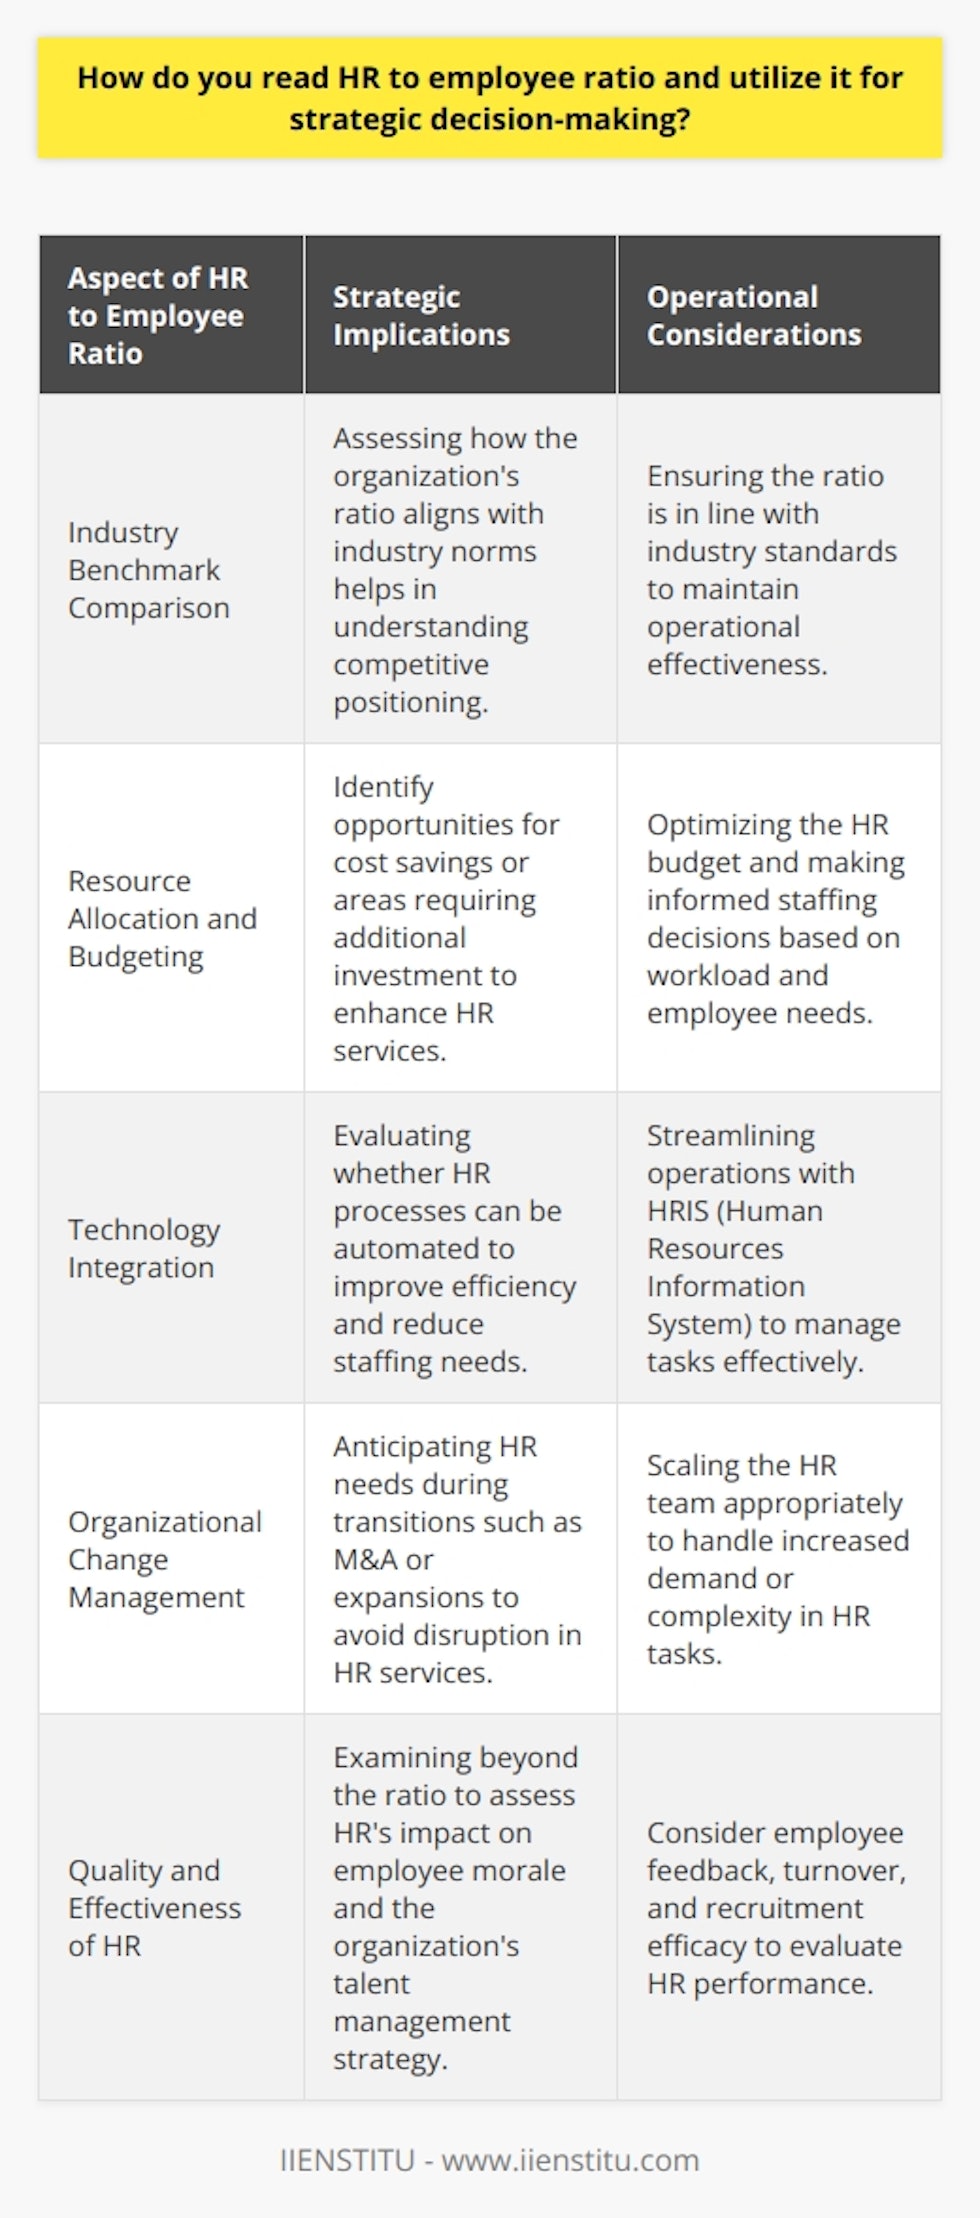 The HR to employee ratio is a critical measurement that indicates the number of HR professionals available to service the employee base within an organization. This ratio is commonly used to assess the capacity and operational efficiency of the HR department, which plays a significant role in formulating strategic decisions that impact the entire organization.To draw meaningful conclusions from the HR to employee ratio, it's important to establish the ratio within the context of industry norms and organizational needs. Typically, the number of HR staff may vary depending on the complexity and nature of the HR services required by the employees. For instance, organizations with complex labor relations, extensive training programs, or international HR management may require more HR professionals per employee compared to those with less demanding HR requirements.Strategically, an organization can utilize the HR to employee ratio to identify whether their HR department is overstaffed or understaffed. This information is crucial for budget optimization and resource allocation. An understaffed HR department might struggle with workload management leading to delays in service delivery, whereas an overstaffed department may result in unnecessary payroll expenditures.Moreover, organizations can utilize this ratio when integrating technology within their HR practices. By analyzing the ratio, they can determine whether it's feasible to automate certain HR tasks to streamline operations and reduce the workload on HR staff. This consideration is important as HR departments are increasingly adopting technology to handle tasks such as payroll processing, benefits management, and performance evaluations, which can help to maintain an optimal HR to employee ratio while enhancing the department's efficiency.Furthermore, the HR to employee ratio provides valuable insights during periods of organizational change such as mergers, acquisitions, or rapid growth phases. Leaders can use the ratio to anticipate the need for scaling the HR department to accommodate an influx of new employees or to manage the complex HR challenges that arise from such changes.When utilizing the HR to employee ratio in decision-making, it is paramount that organizations also consider qualitative factors. While a certain ratio may indicate efficiency, it does not necessarily reflect the effectiveness of the HR team. Therefore, organizations should also consider employee feedback, turnover rates, time to fill positions, and the quality of applicant pools to gauge the true performance of their HR practices.Overall, the HR to employee ratio is more than a mere statistic; it is a strategic barometer that can inform an organization about the robustness of its HR support systems. By analyzing this ratio in conjunction with other metrics and employee feedback, organizations can ensure their HR departments are not only well-staffed but also aligned with the broader strategic objectives of growth, sustainability, and exceptional human capital management.